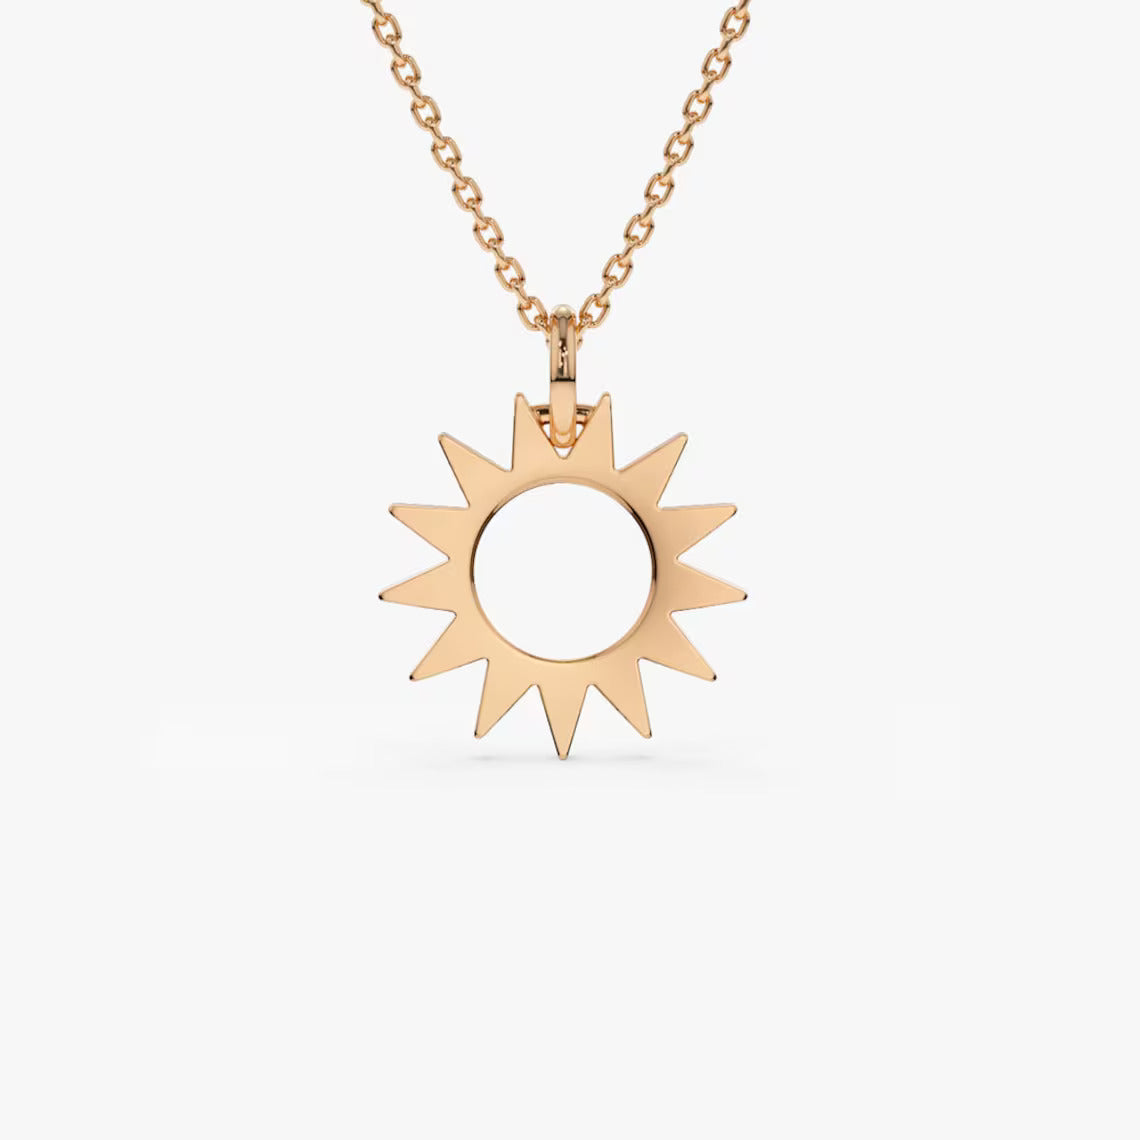 18 Carat Gold Sunshine Necklace - Radiant elegance, symbolizing warmth and positivity, embracing the enduring radiance of Arabian heritage in the heart of the UAE.